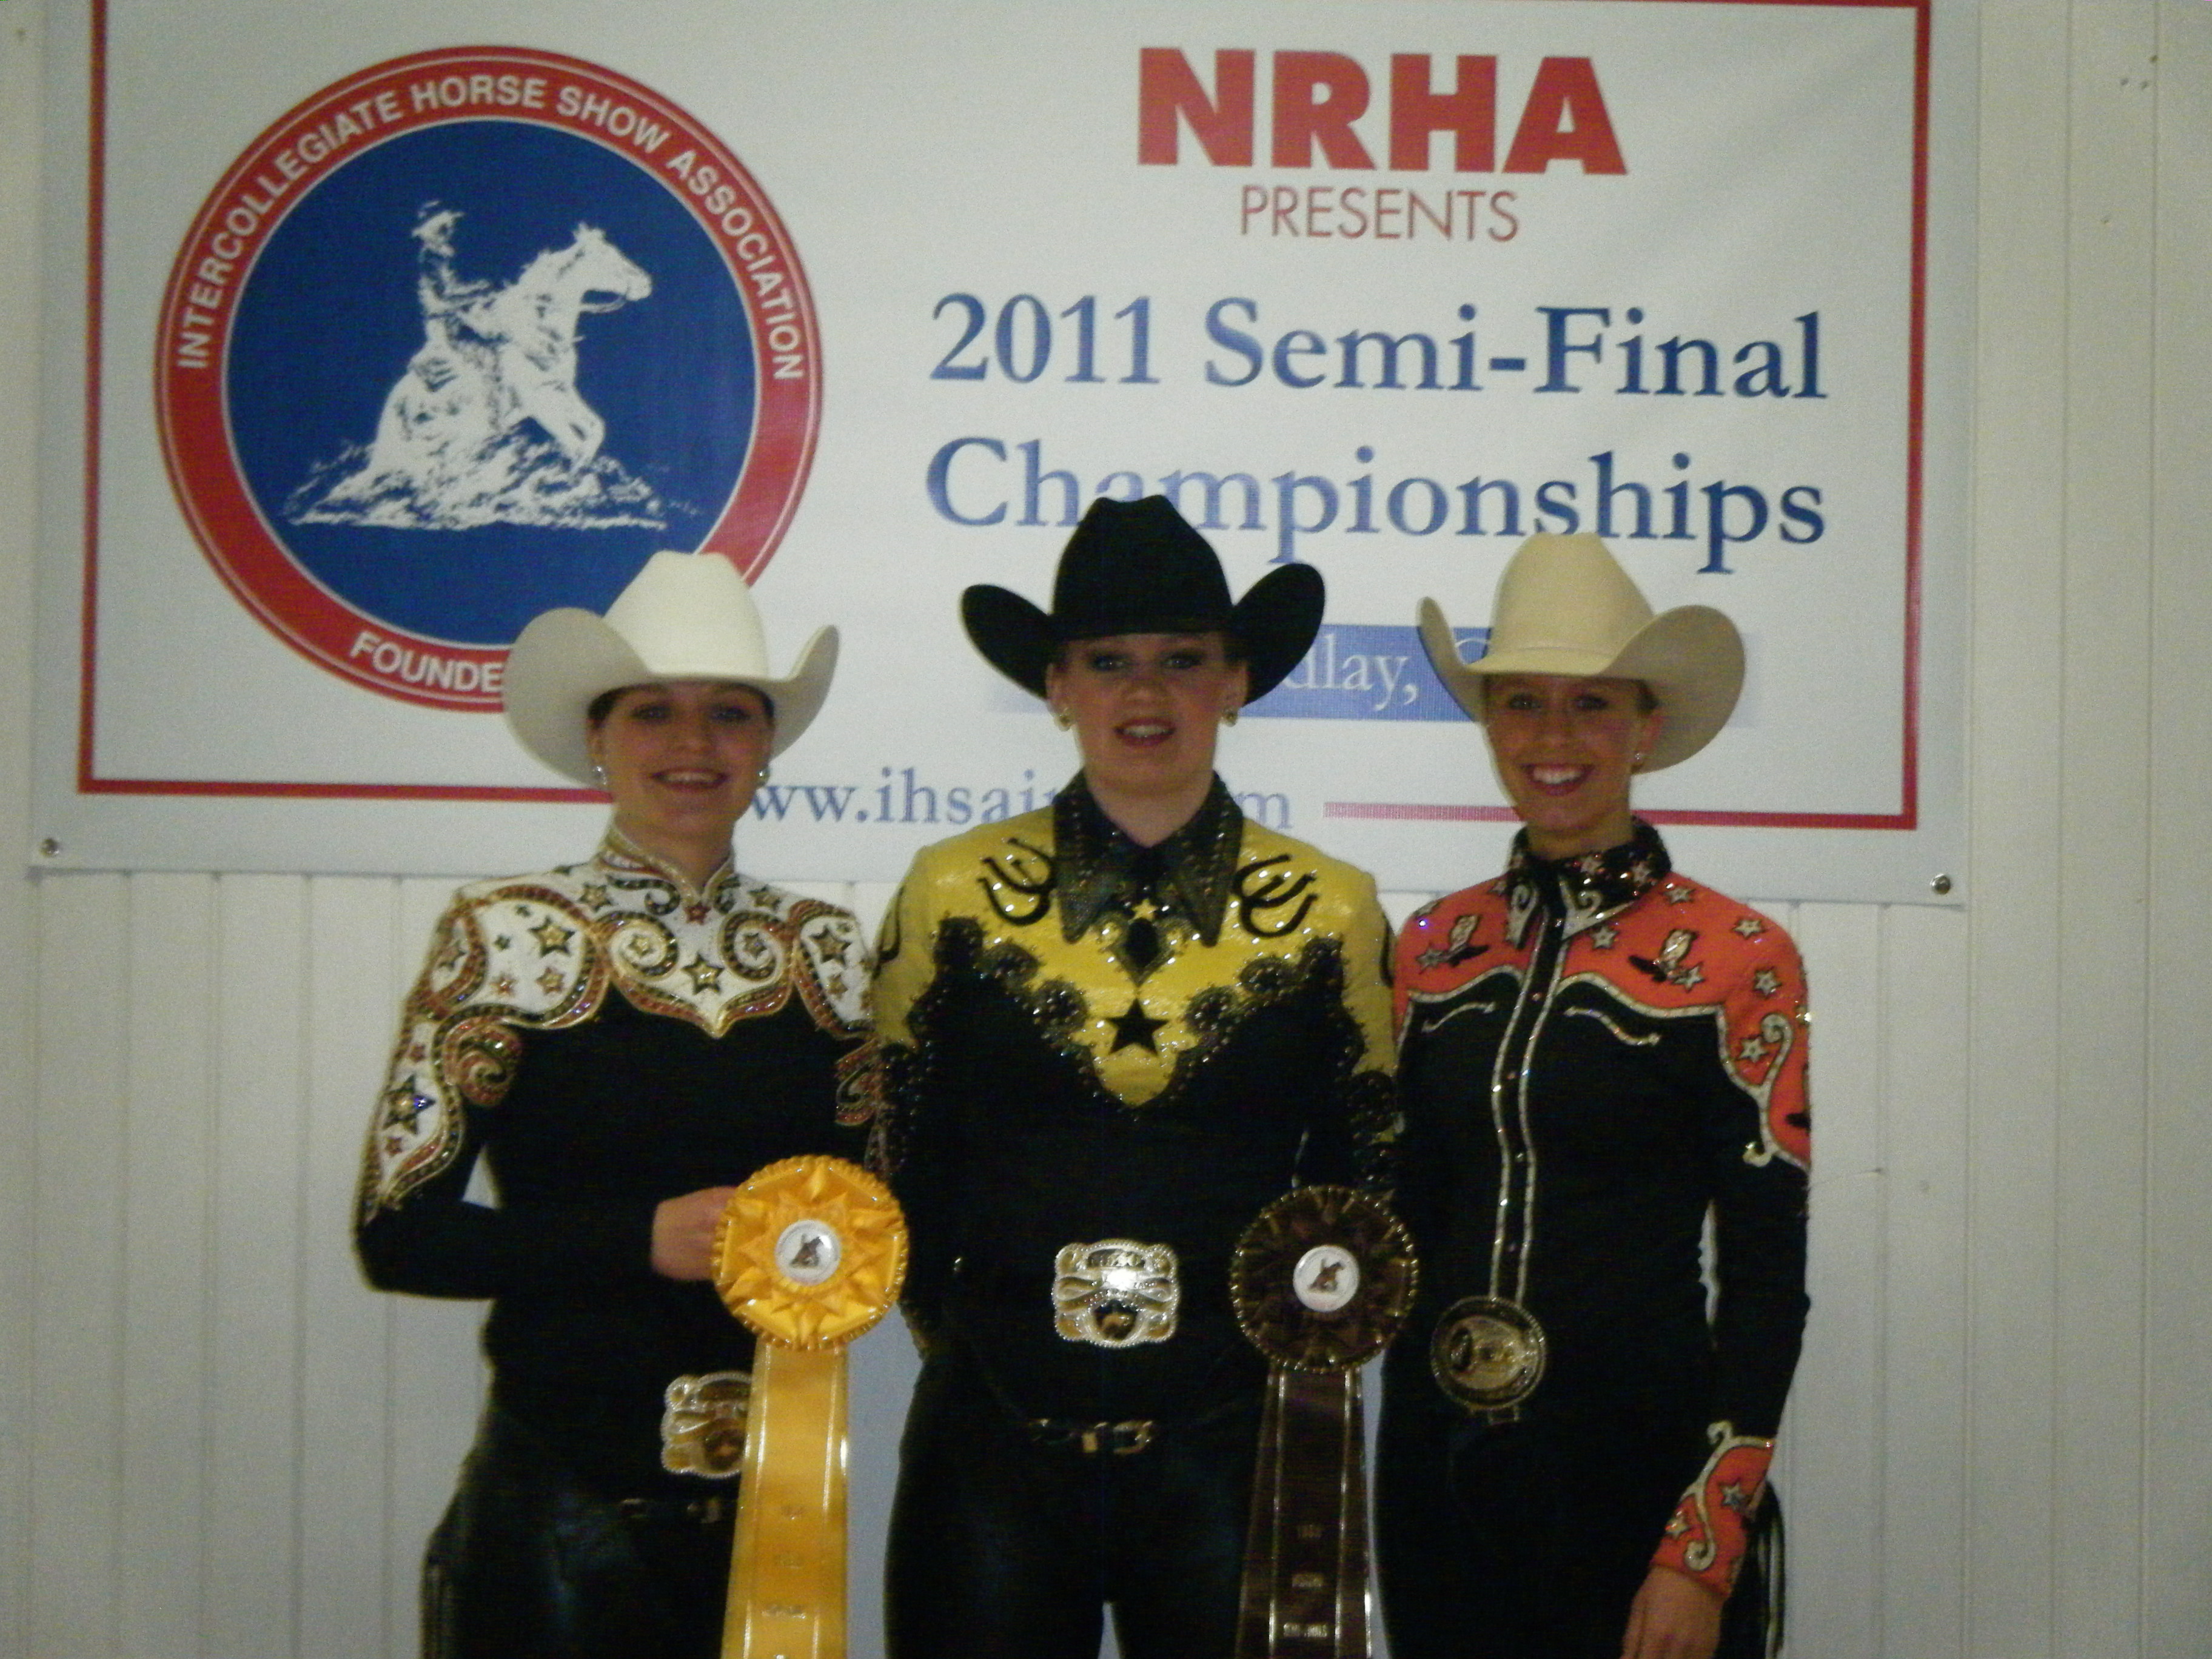 Three members of NDSU's equestrian team display the ribbons they received at the Intercollegiate Horse Show Association's semifinal show in Findlay, Ohio. They are, from left to right: Shannon Voges, Juliann Zach and Kelly O'Connell.